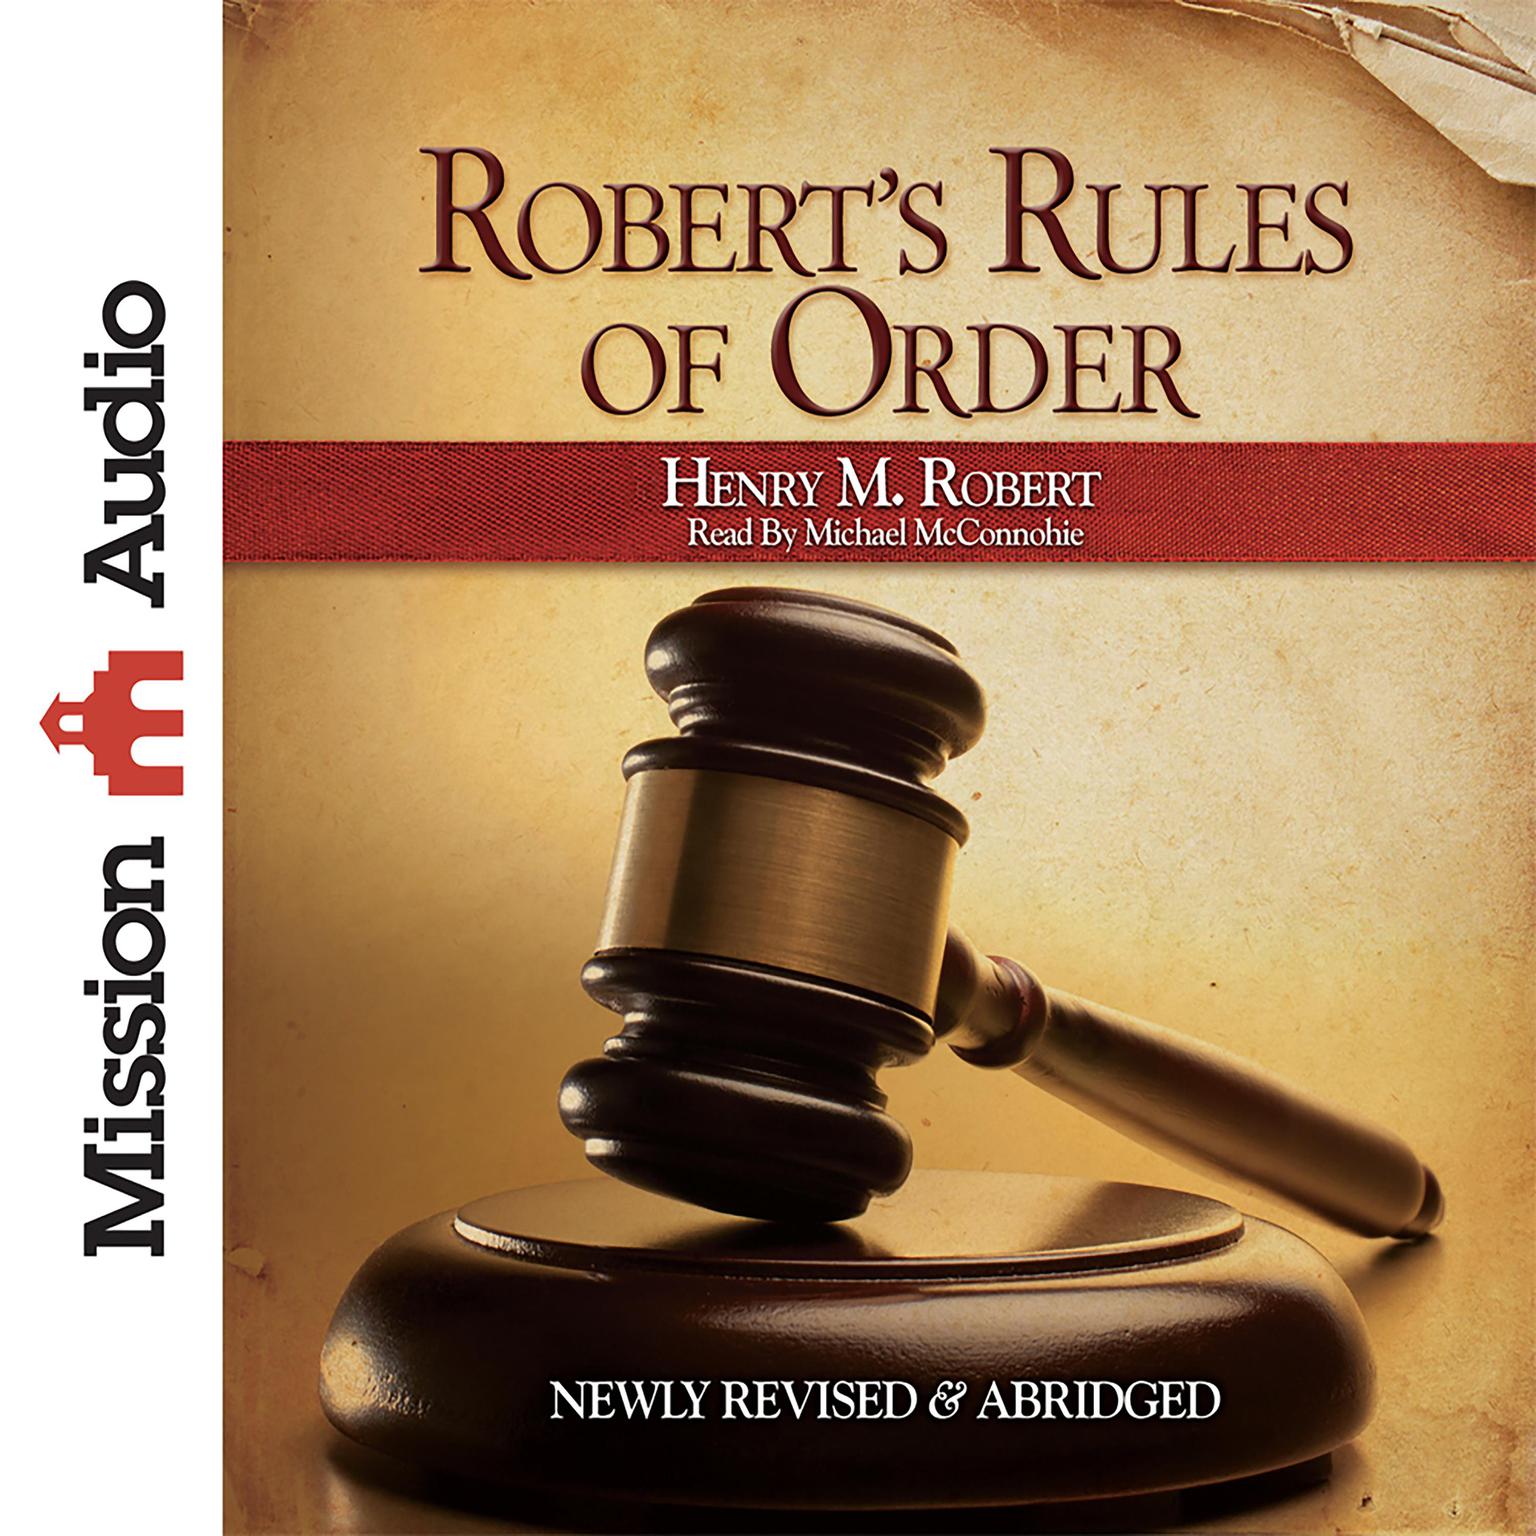 Roberts Rules of Order (Abridged) Audiobook, by Henry M. Robert